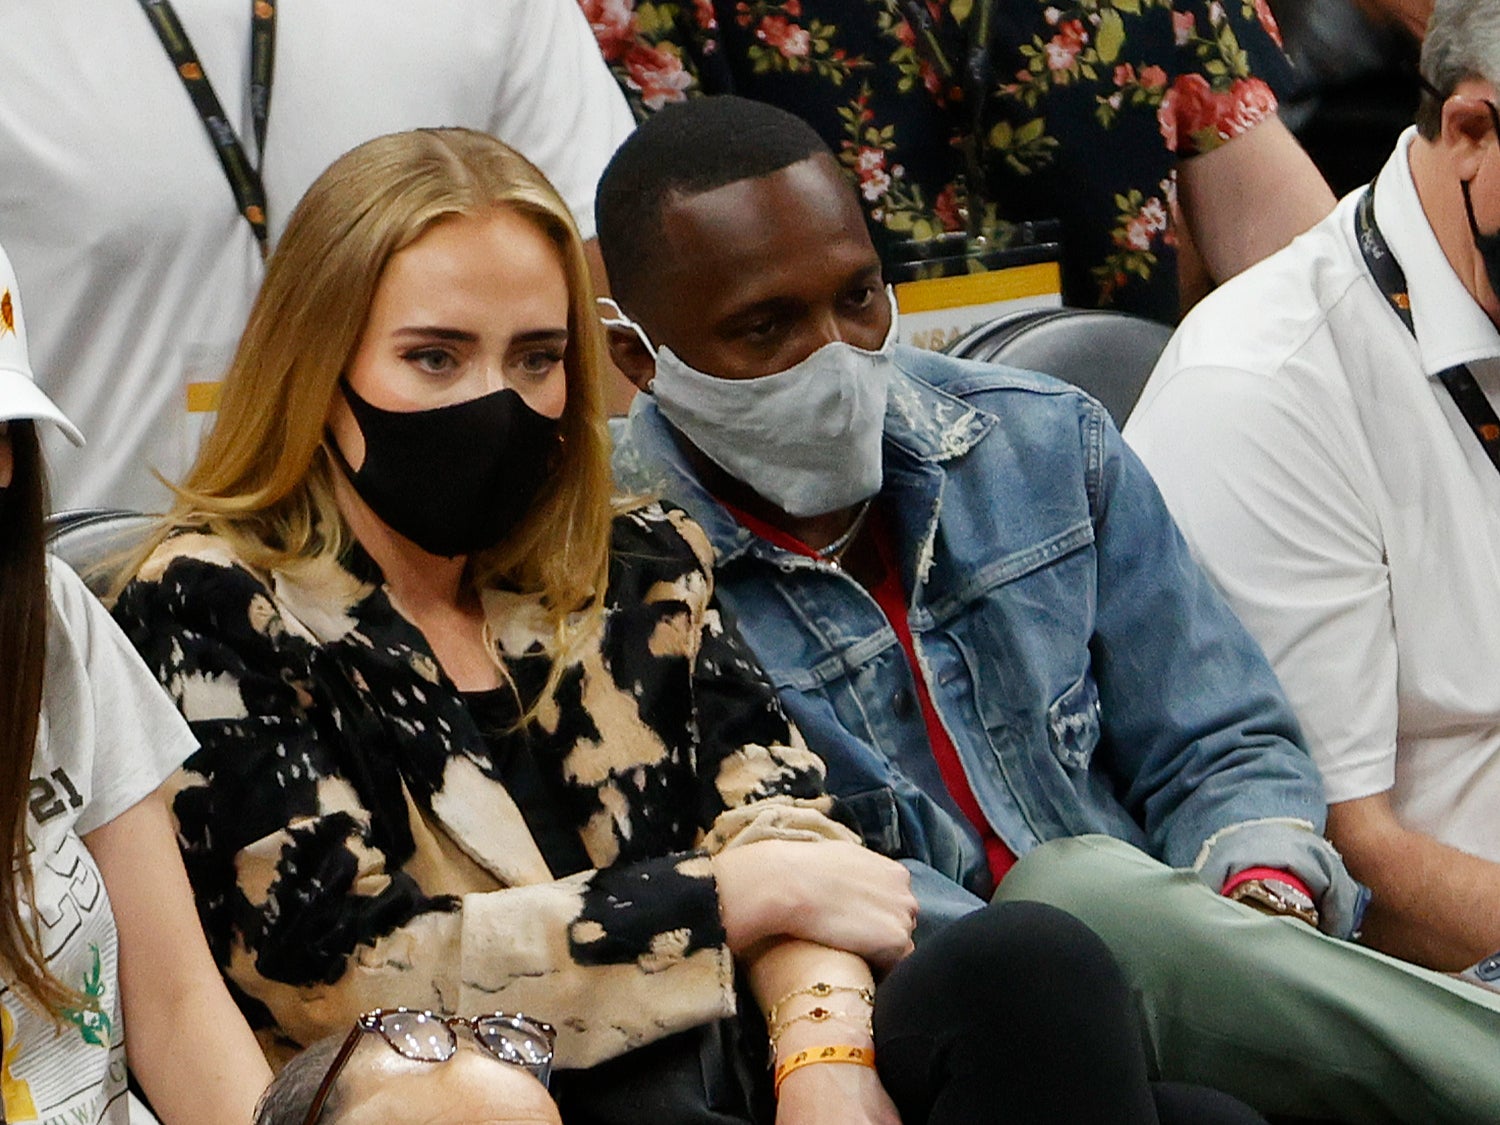 The pair attended an NBA game together in July 2021